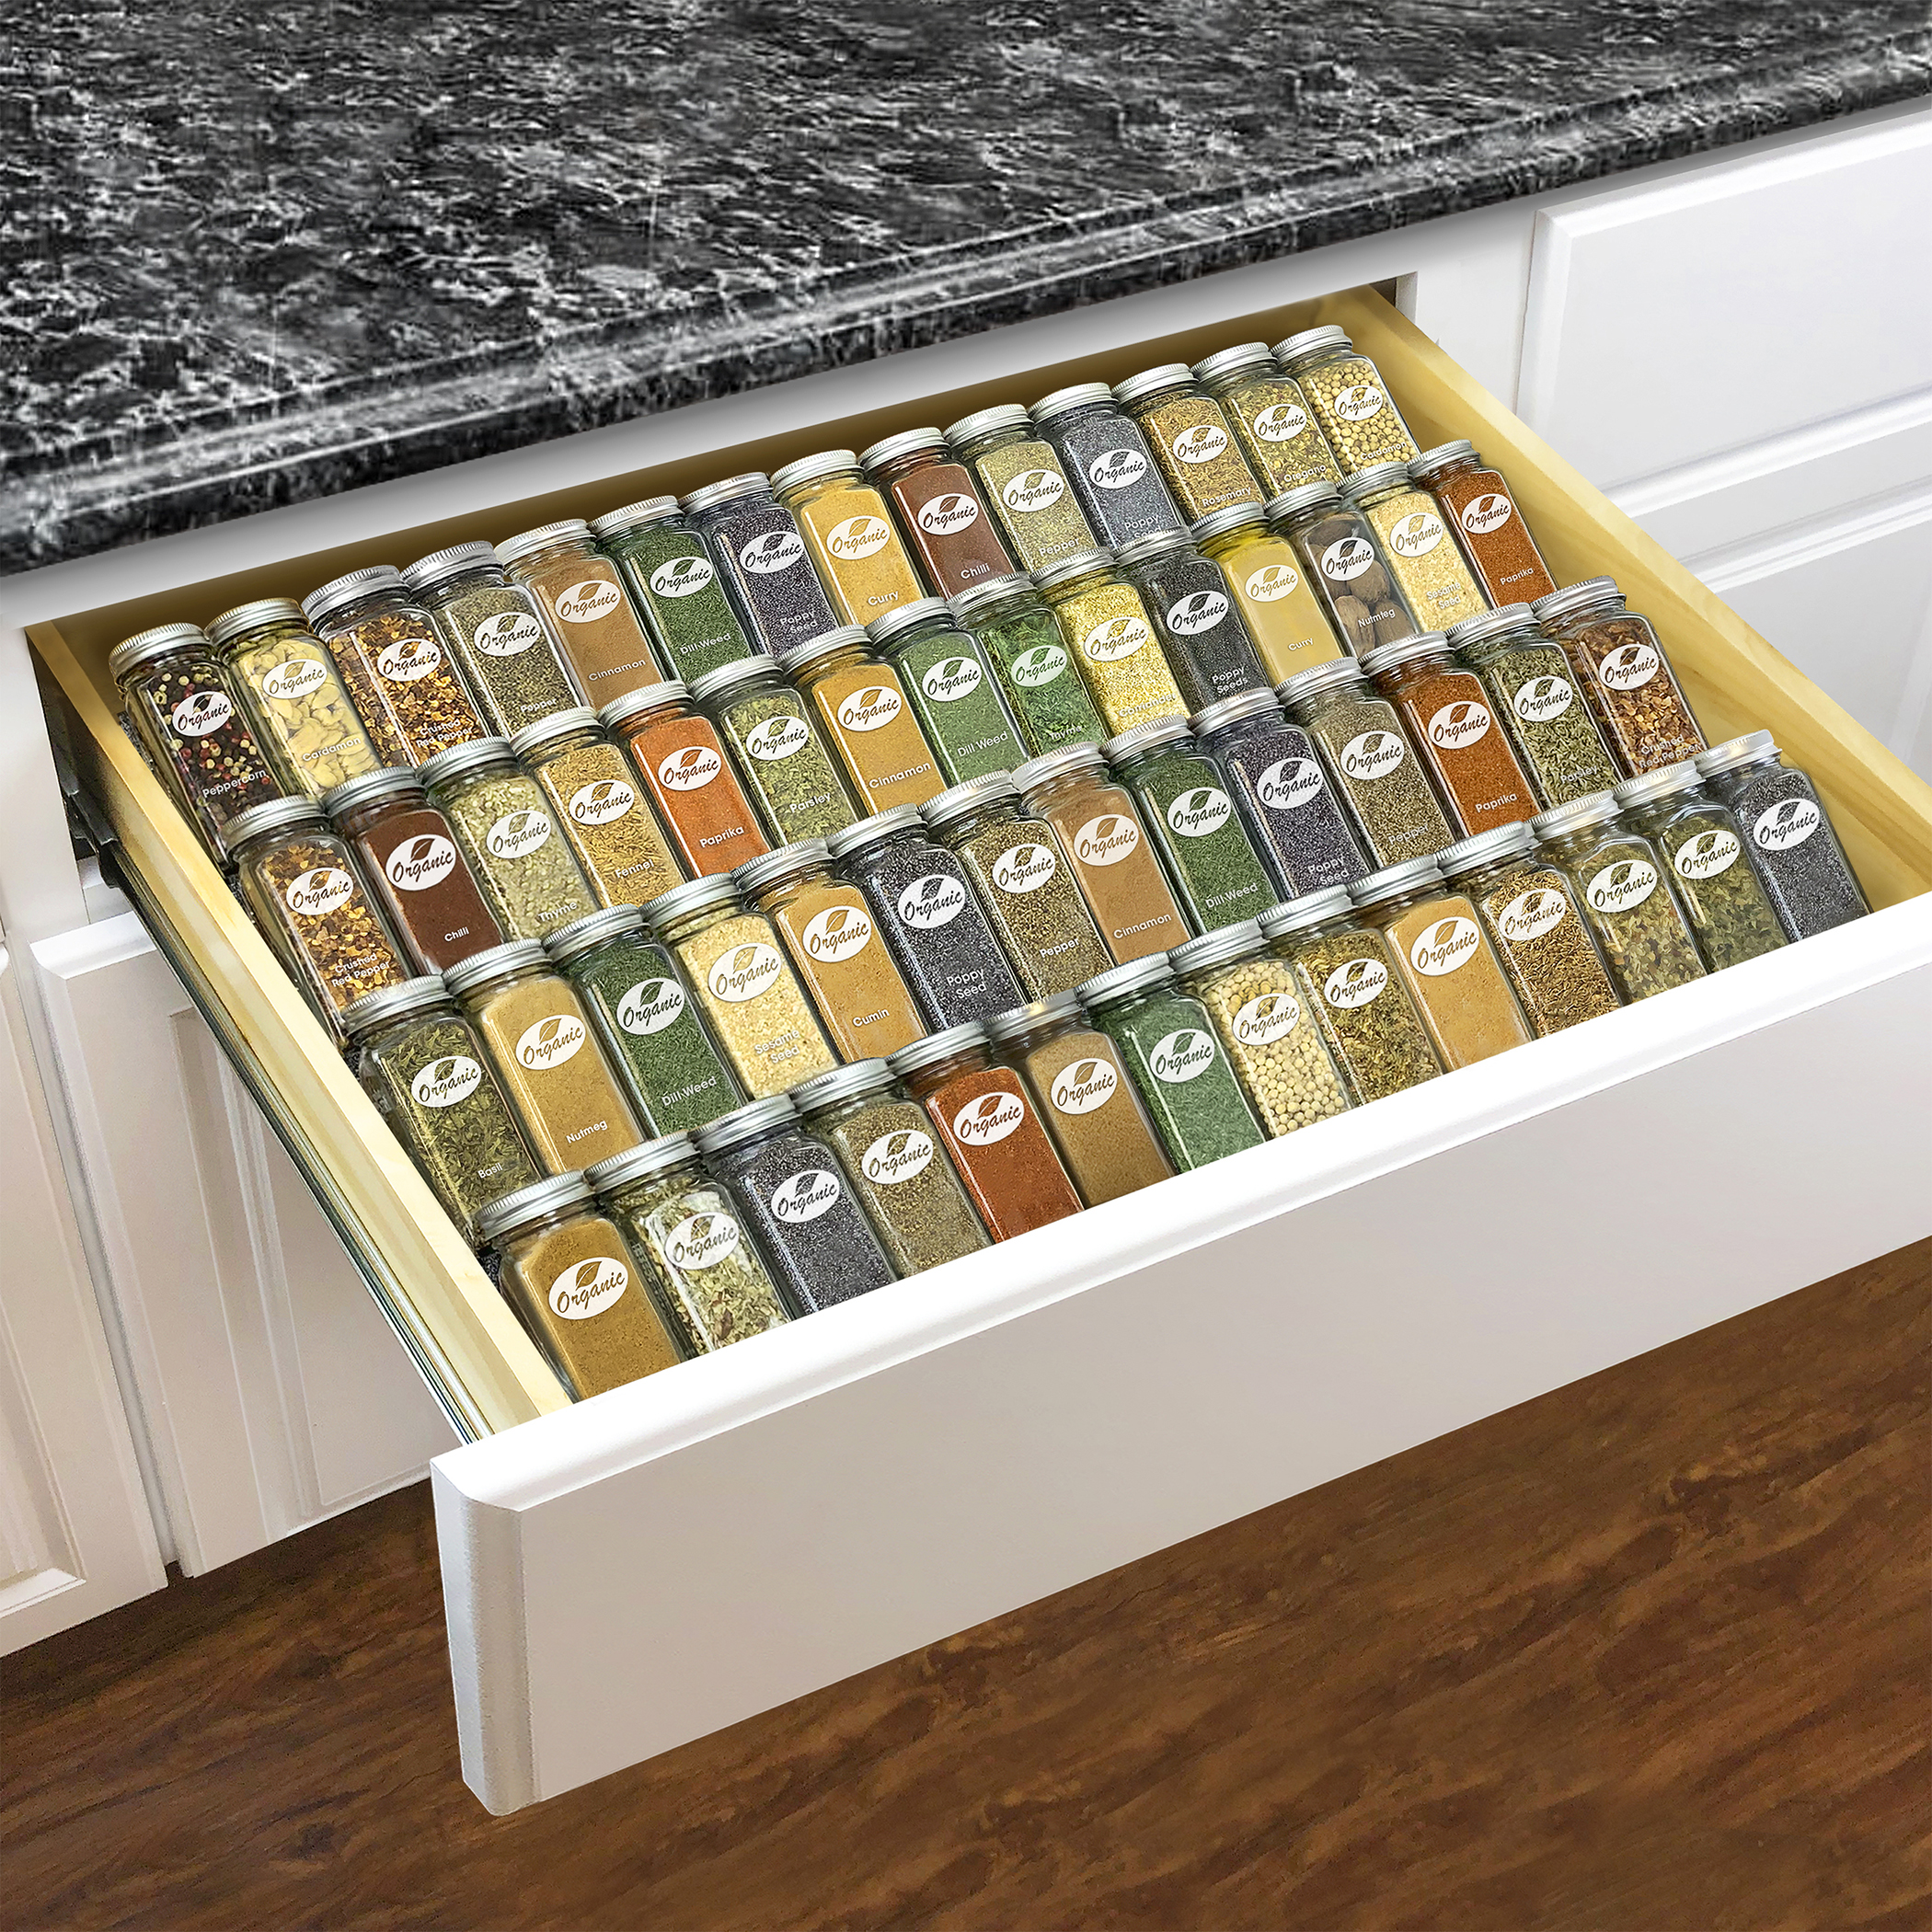 GZOOGHOME Spice Drawer Organizer with 28 Spice Jars and 378 Spice Labels,  Seasoning Rack Tray Insert for Kitchen Drawers, 12.8 Wide x 17.5 Deep